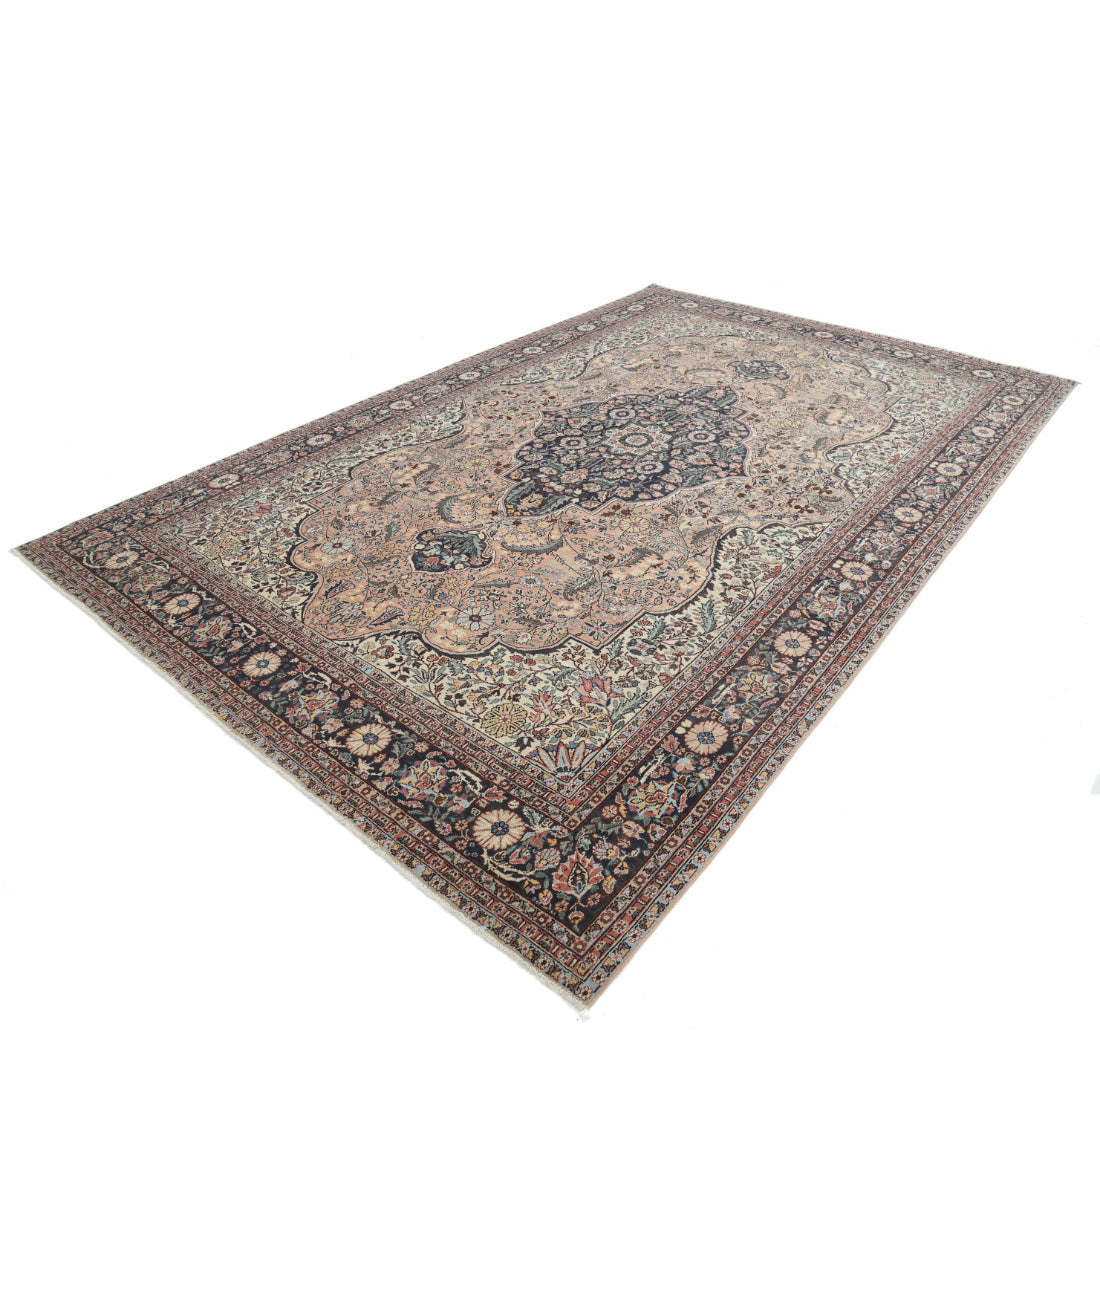 Hand Knotted Vintage Persian Tabriz Wool Rug - 8'3'' x 12'11'' 8'3'' x 12'11'' (248 X 388) / Pink / Blue